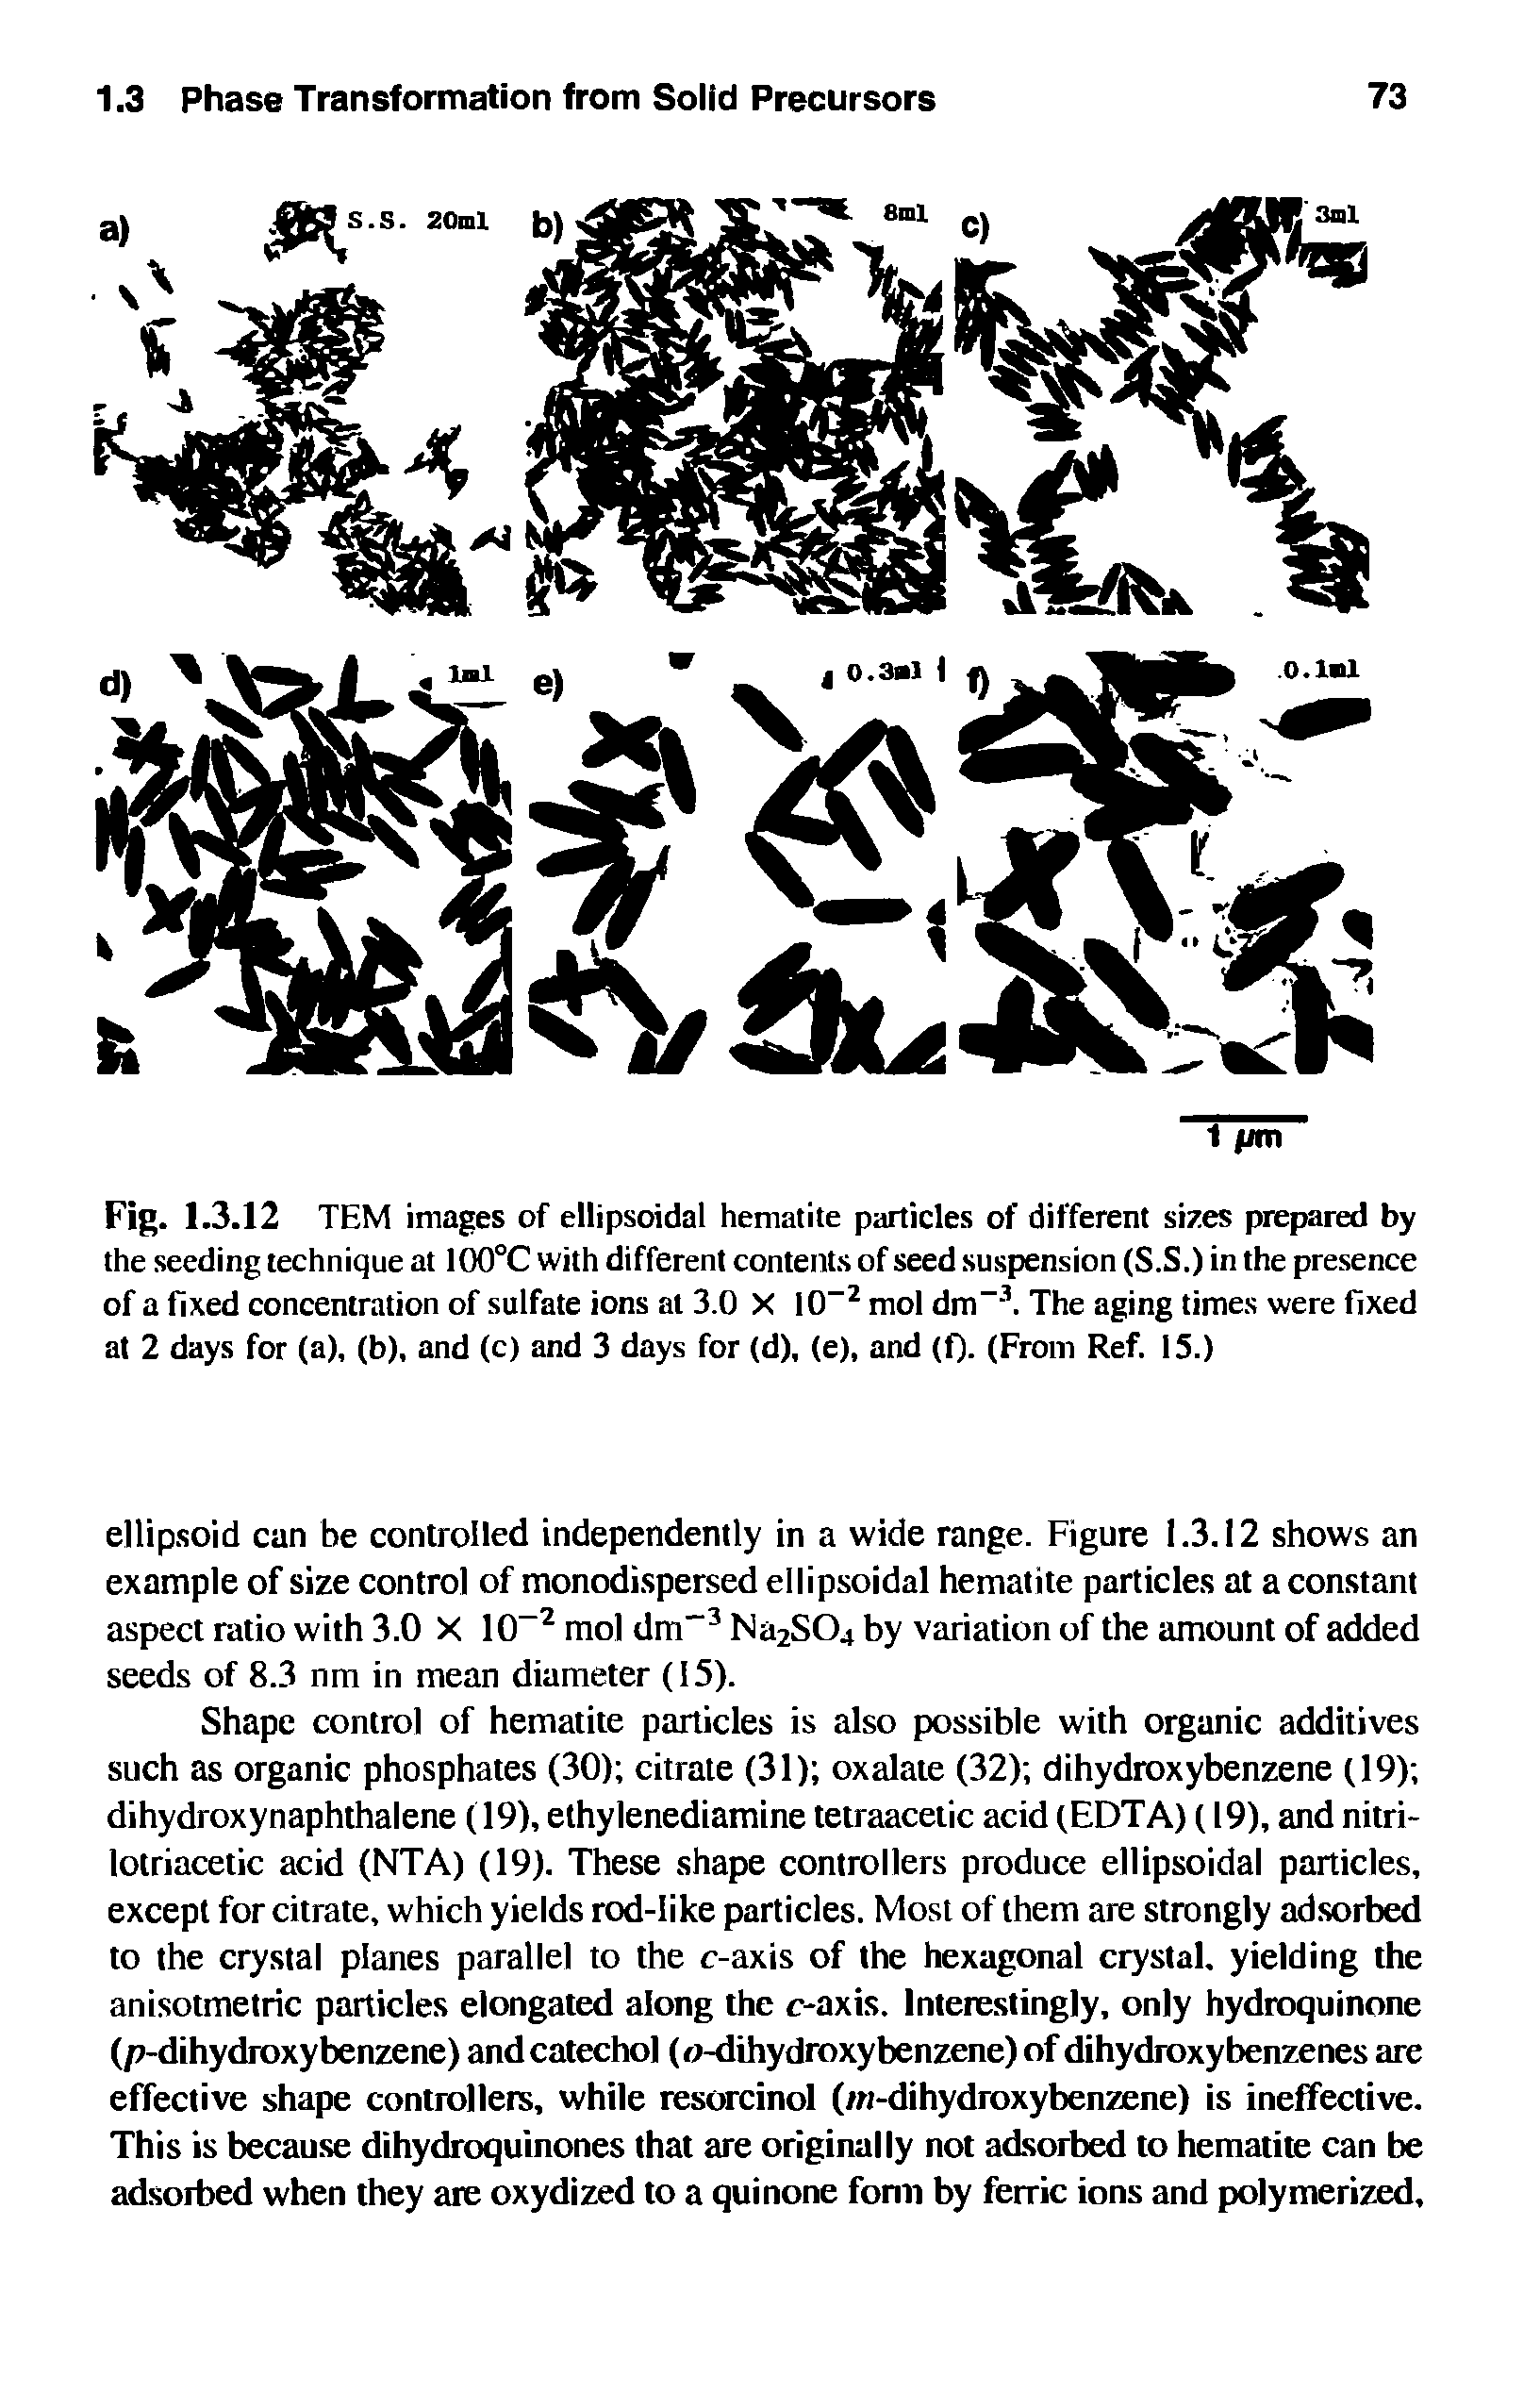 Fig. 1.3.12 TEM images of ellipsoidal hematite particles of different sizes prepared by the seeding technique at 100°C with different contents of seed suspension (S.S.) in the presence of a fixed concentration of sulfate ions at 3.0 X 10-2 mol dm-3. The aging times were fixed at 2 days for (a), (b), and (c) and 3 days for (d), (e), and (f). (From Ref. 15.)...